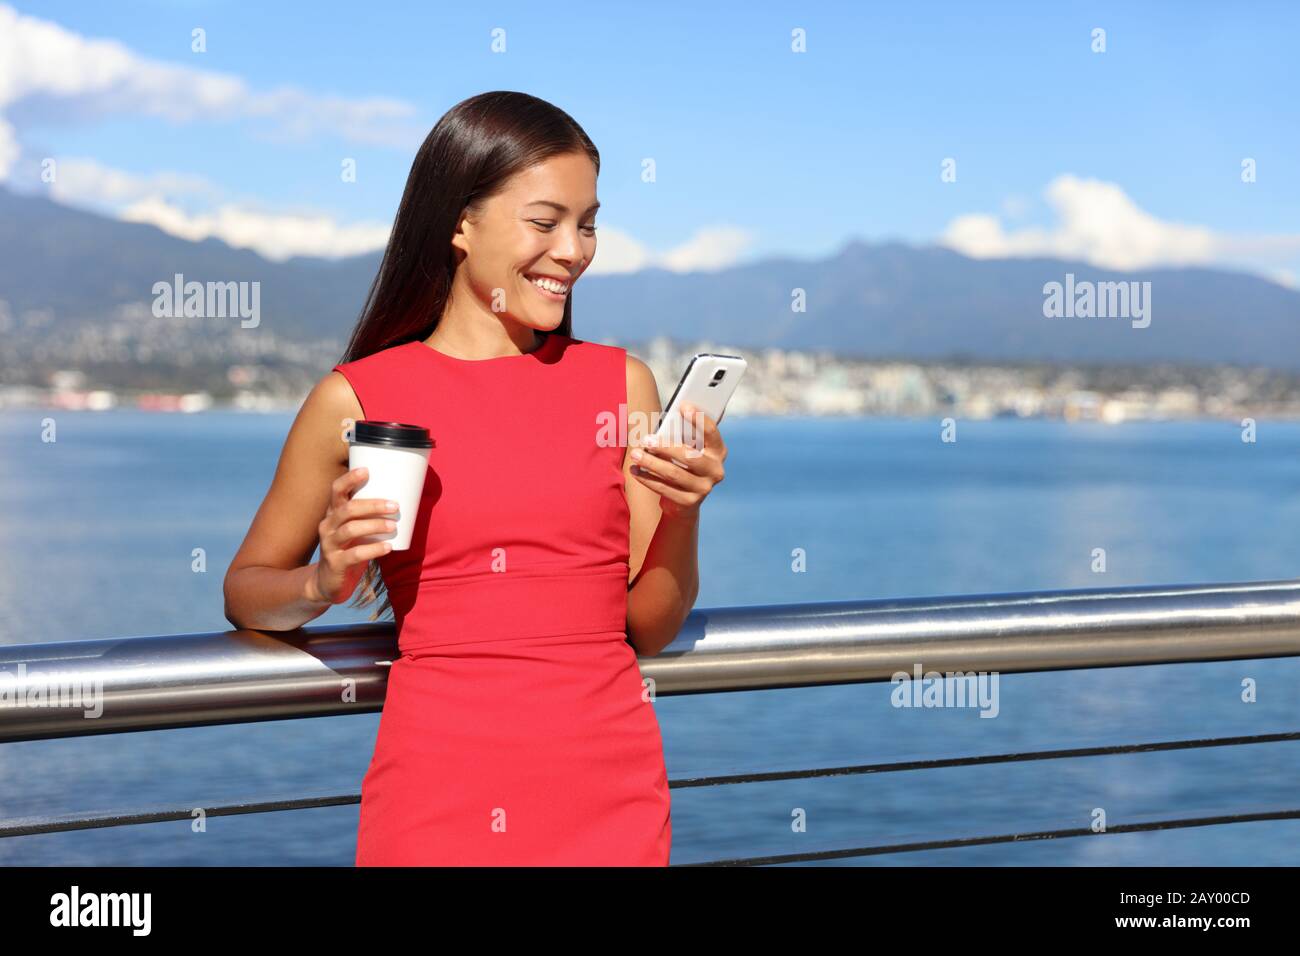 Businesswoman drinking coffee using mobile phone app to play video games online. Asian woman relaxing. Work urban city lifestyle. Stock Photo